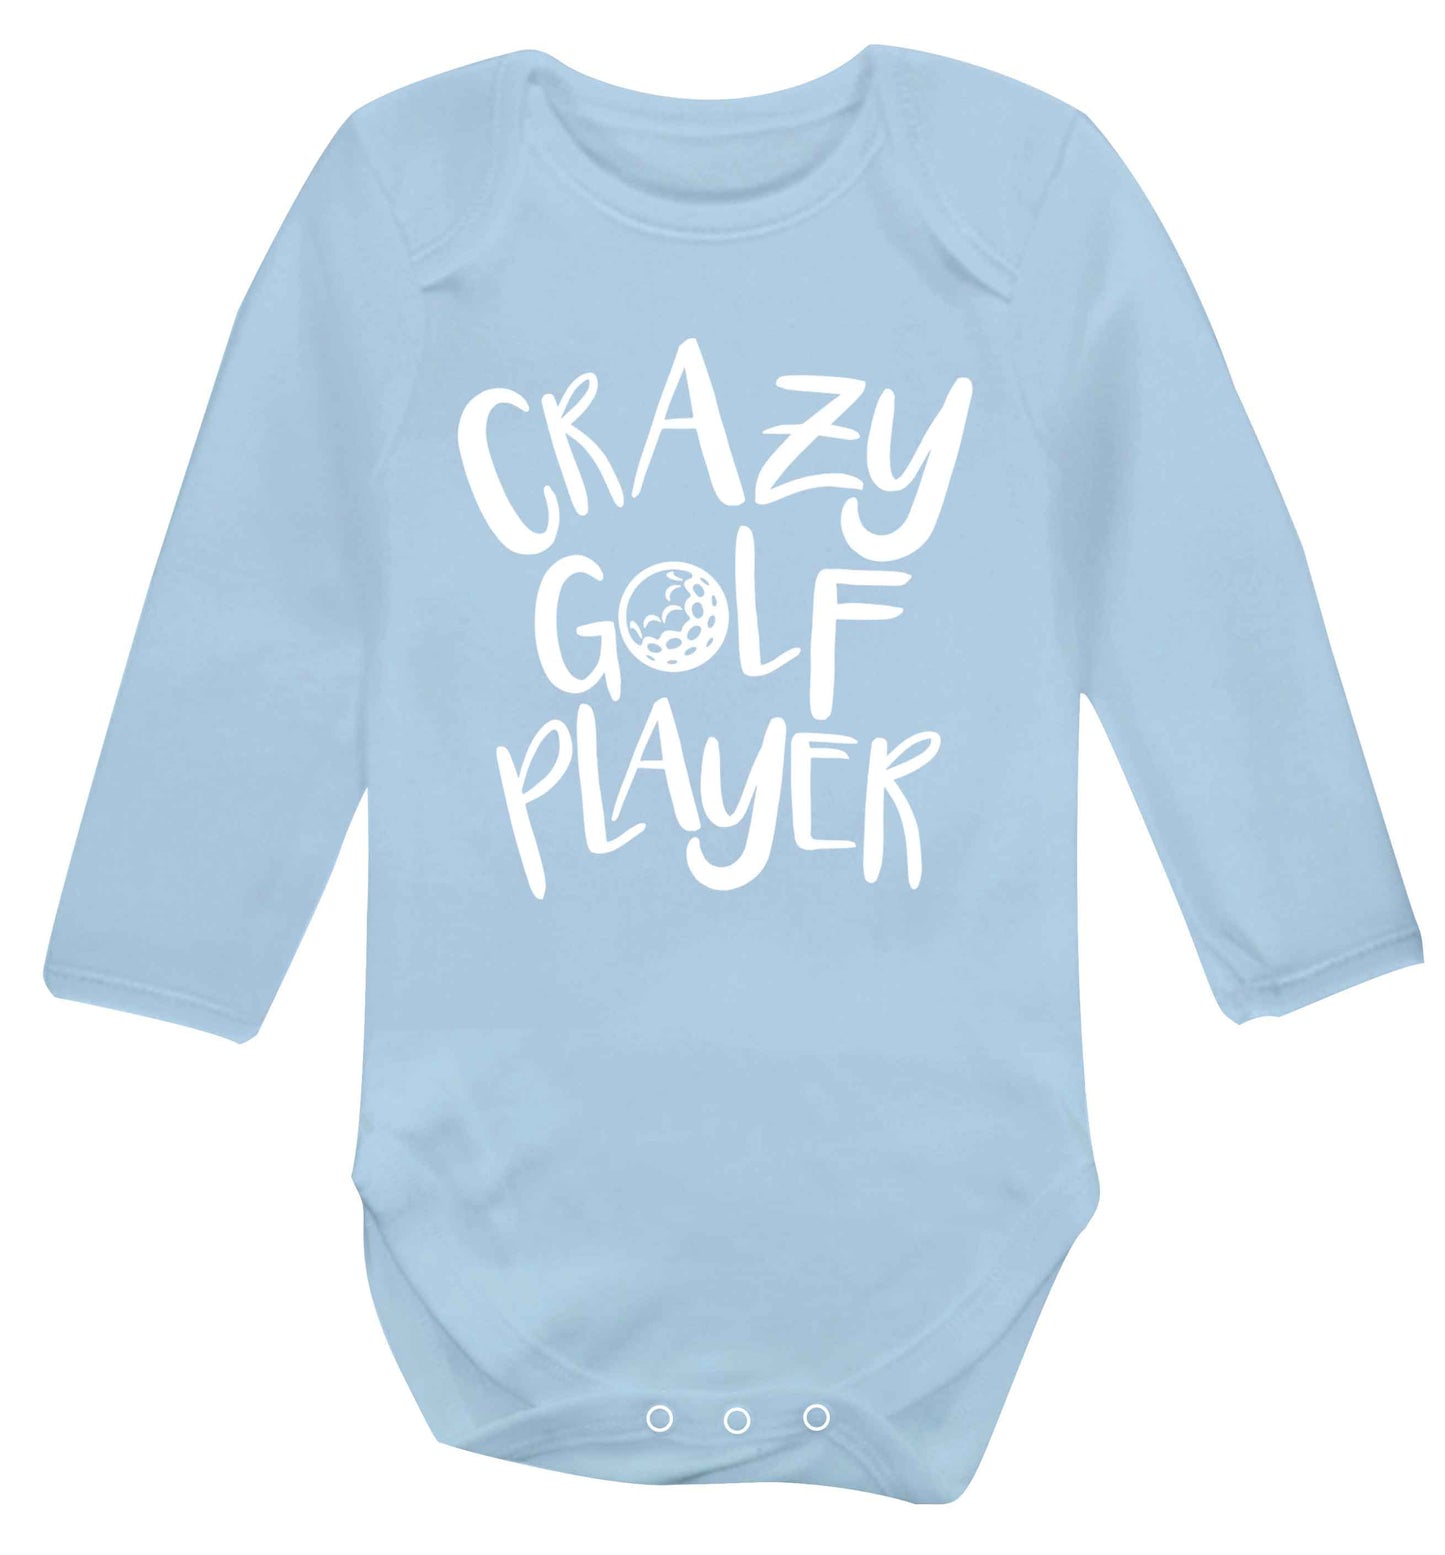 Crazy golf player Baby Vest long sleeved pale blue 6-12 months